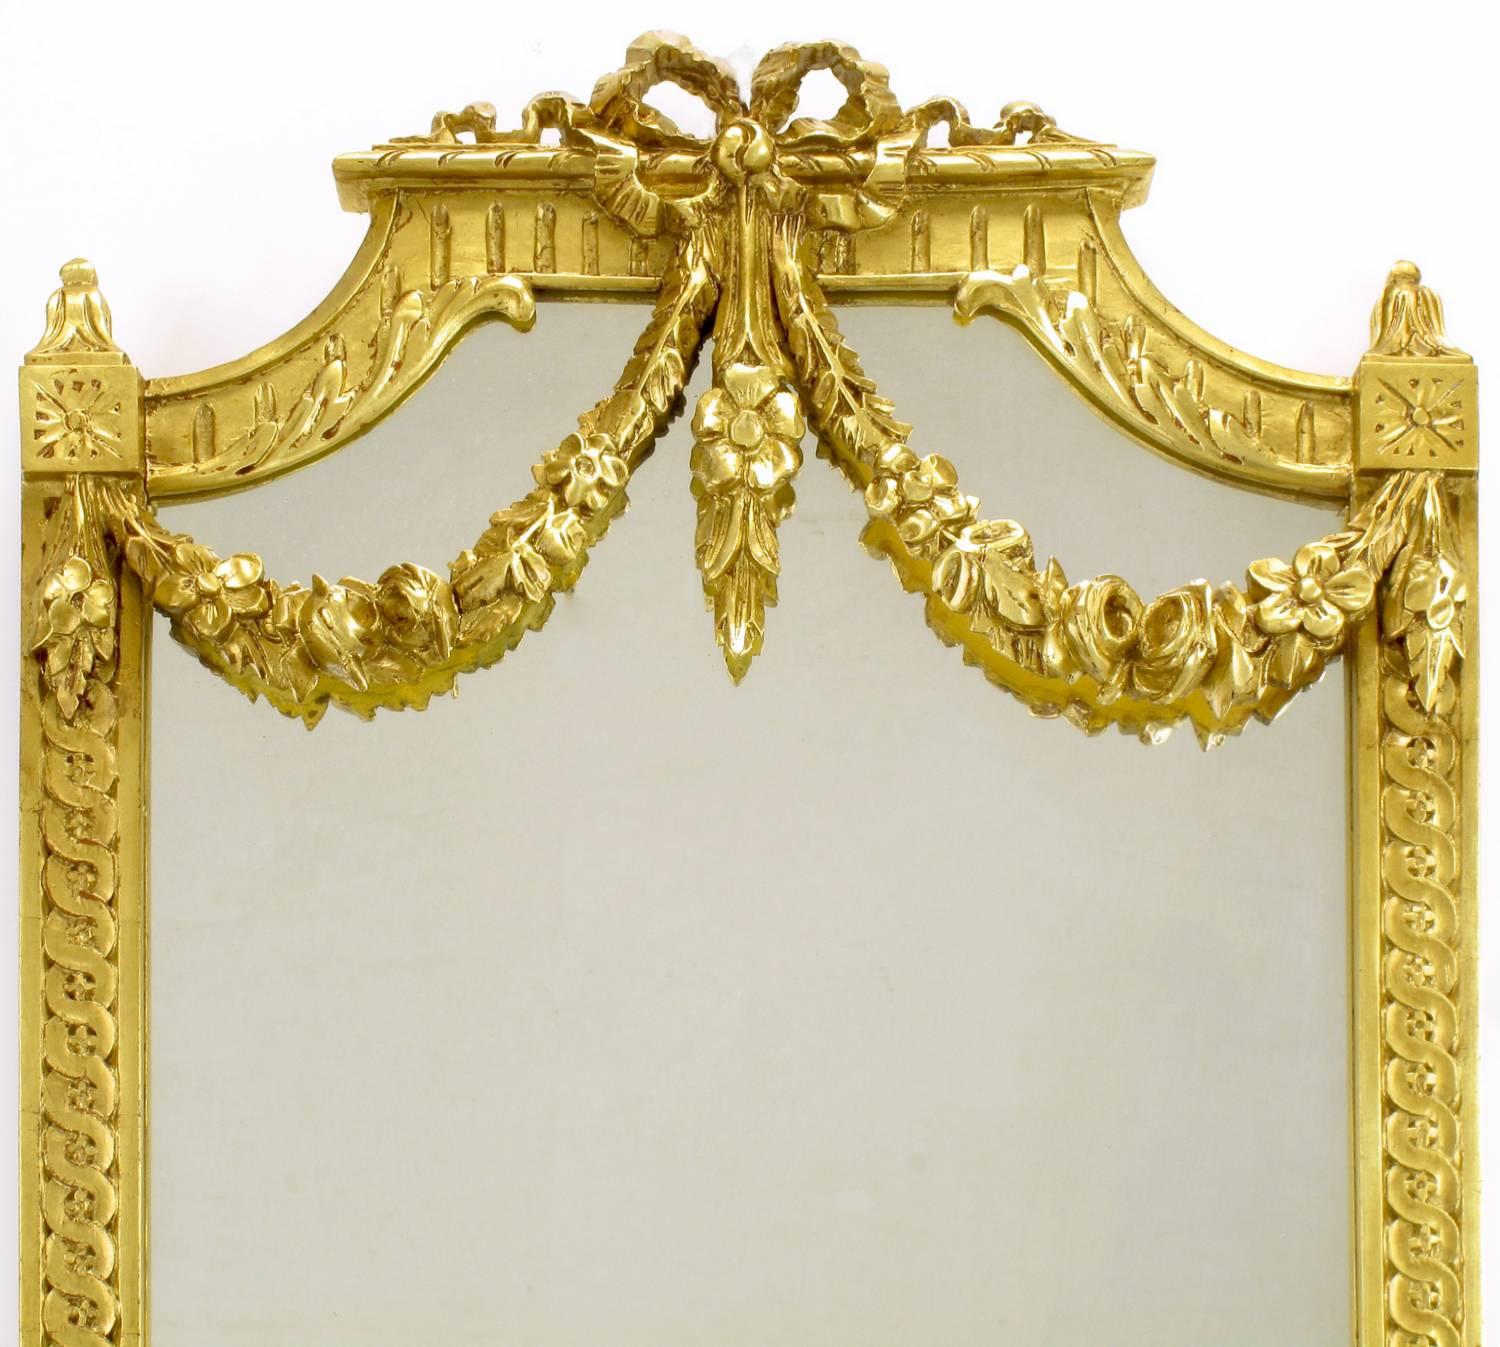 Early 20th Century Italian Giltwood Phoenix Wall Mounted Console and Mirror For Sale 1